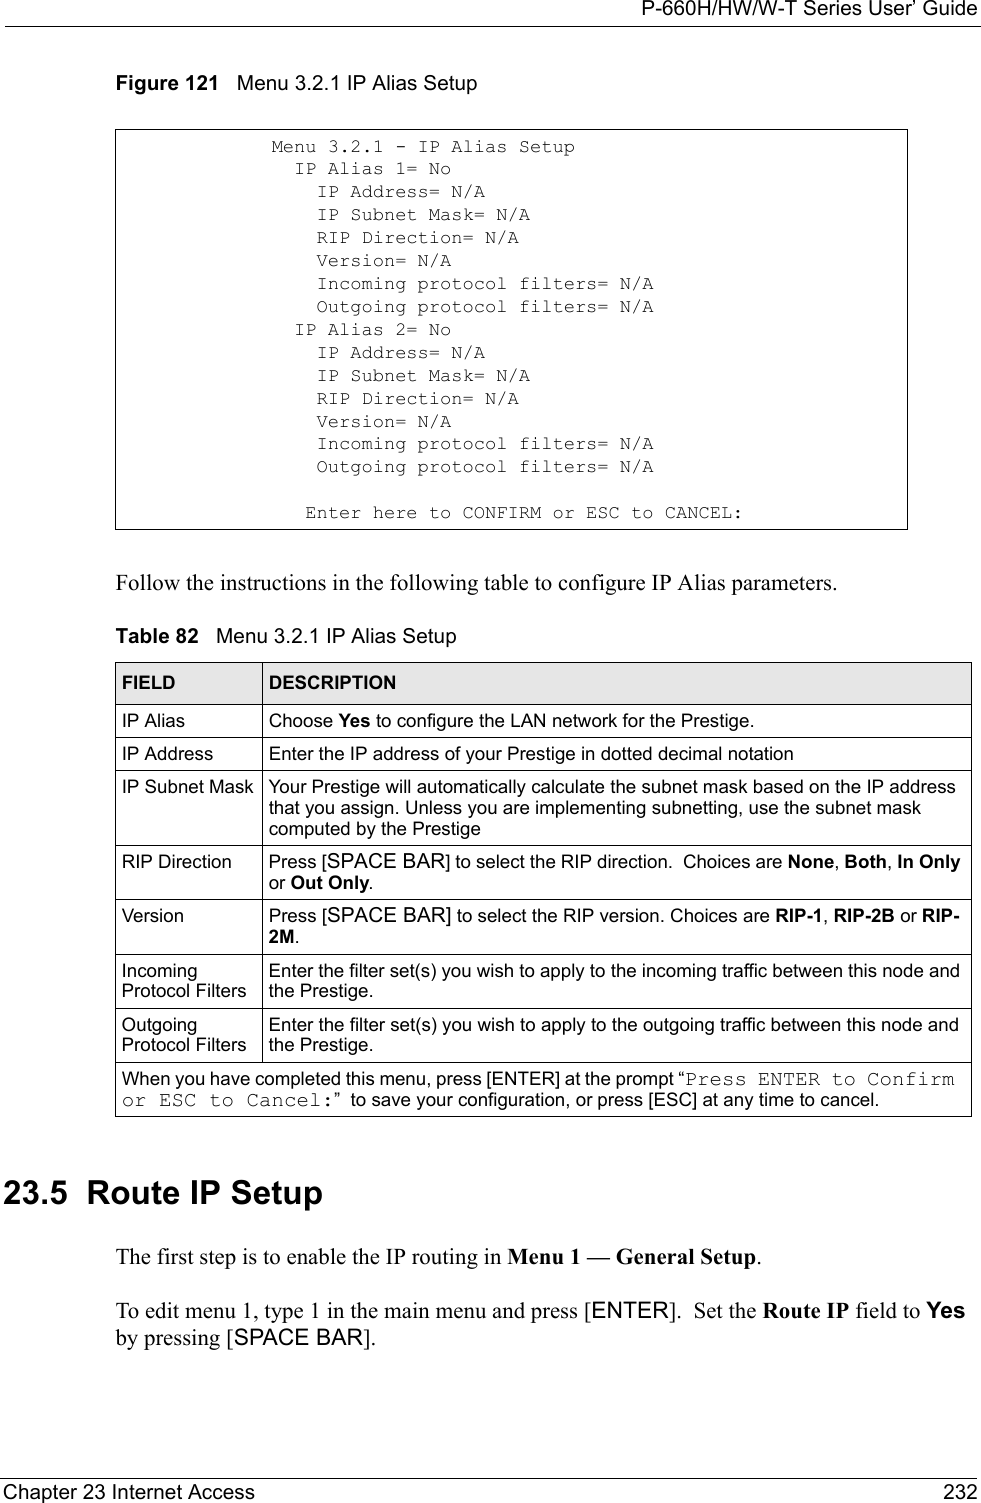 P-660H/HW/W-T Series User’ GuideChapter 23 Internet Access 232Figure 121   Menu 3.2.1 IP Alias SetupFollow the instructions in the following table to configure IP Alias parameters.23.5  Route IP SetupThe first step is to enable the IP routing in Menu 1 — General Setup. To edit menu 1, type 1 in the main menu and press [ENTER].  Set the Route IP field to Yes by pressing [SPACE BAR].Menu 3.2.1 - IP Alias Setup  IP Alias 1= No    IP Address= N/A    IP Subnet Mask= N/A    RIP Direction= N/A    Version= N/A    Incoming protocol filters= N/A    Outgoing protocol filters= N/A  IP Alias 2= No    IP Address= N/A    IP Subnet Mask= N/A    RIP Direction= N/A    Version= N/A    Incoming protocol filters= N/A    Outgoing protocol filters= N/A   Enter here to CONFIRM or ESC to CANCEL:Table 82   Menu 3.2.1 IP Alias SetupFIELD DESCRIPTIONIP Alias Choose Yes to configure the LAN network for the Prestige.IP Address Enter the IP address of your Prestige in dotted decimal notationIP Subnet Mask Your Prestige will automatically calculate the subnet mask based on the IP address that you assign. Unless you are implementing subnetting, use the subnet mask computed by the PrestigeRIP Direction Press [SPACE BAR] to select the RIP direction.  Choices are None, Both, In Only or Out Only.Version Press [SPACE BAR] to select the RIP version. Choices are RIP-1, RIP-2B or RIP-2M.Incoming Protocol FiltersEnter the filter set(s) you wish to apply to the incoming traffic between this node and the Prestige.Outgoing Protocol FiltersEnter the filter set(s) you wish to apply to the outgoing traffic between this node and the Prestige.When you have completed this menu, press [ENTER] at the prompt “Press ENTER to Confirm or ESC to Cancel:”  to save your configuration, or press [ESC] at any time to cancel.